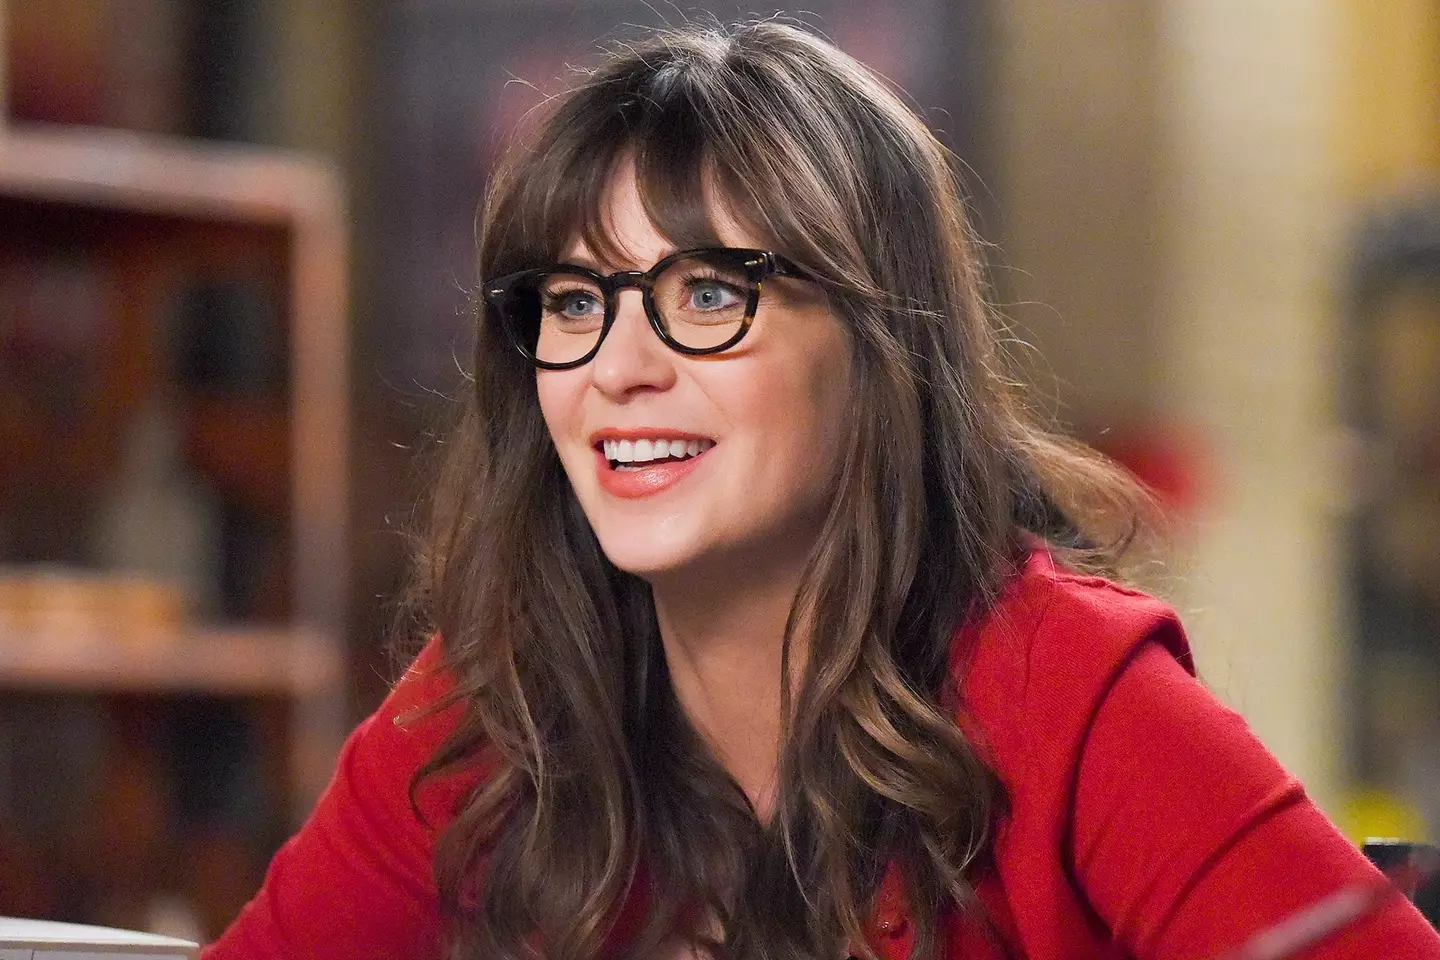 Zooey Deschanel is best known for her role as Jess in New Girl.